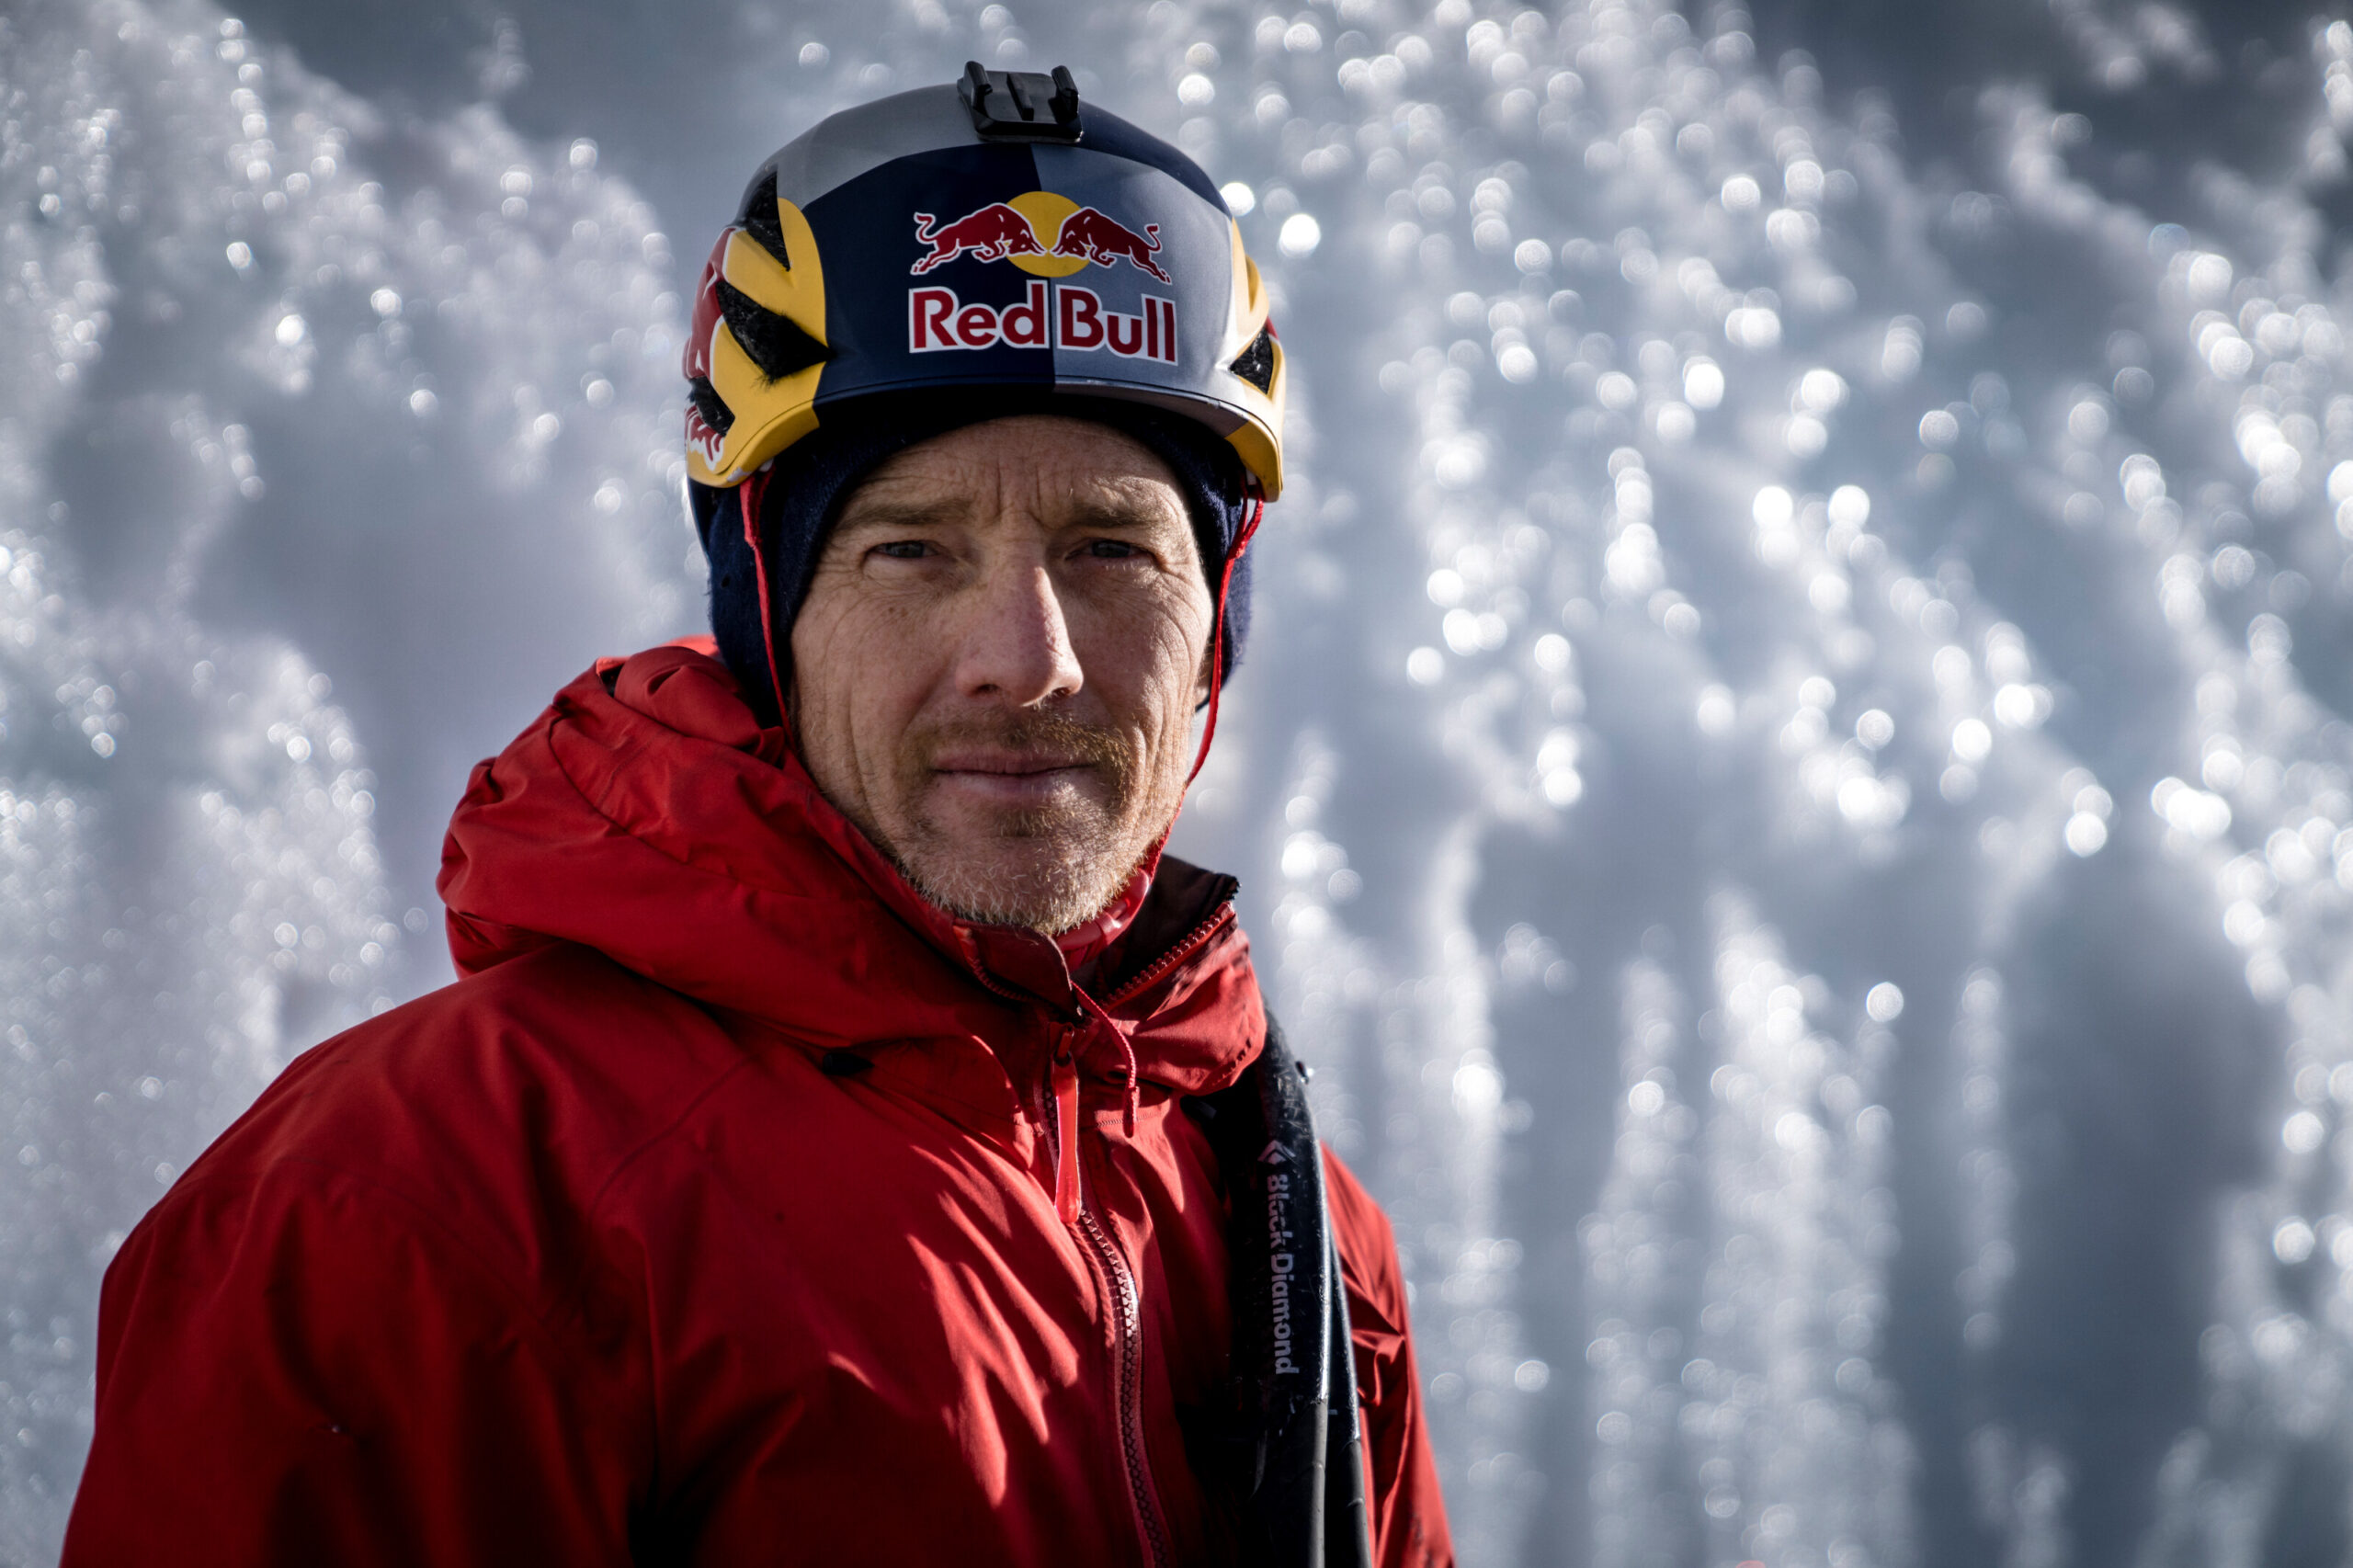 Will Gadd poses for a portrait on Mt Kilimanjaro on 23 February, 2020 in Tanzania, Africa. // Christian Pondella/Red Bull Content Pool